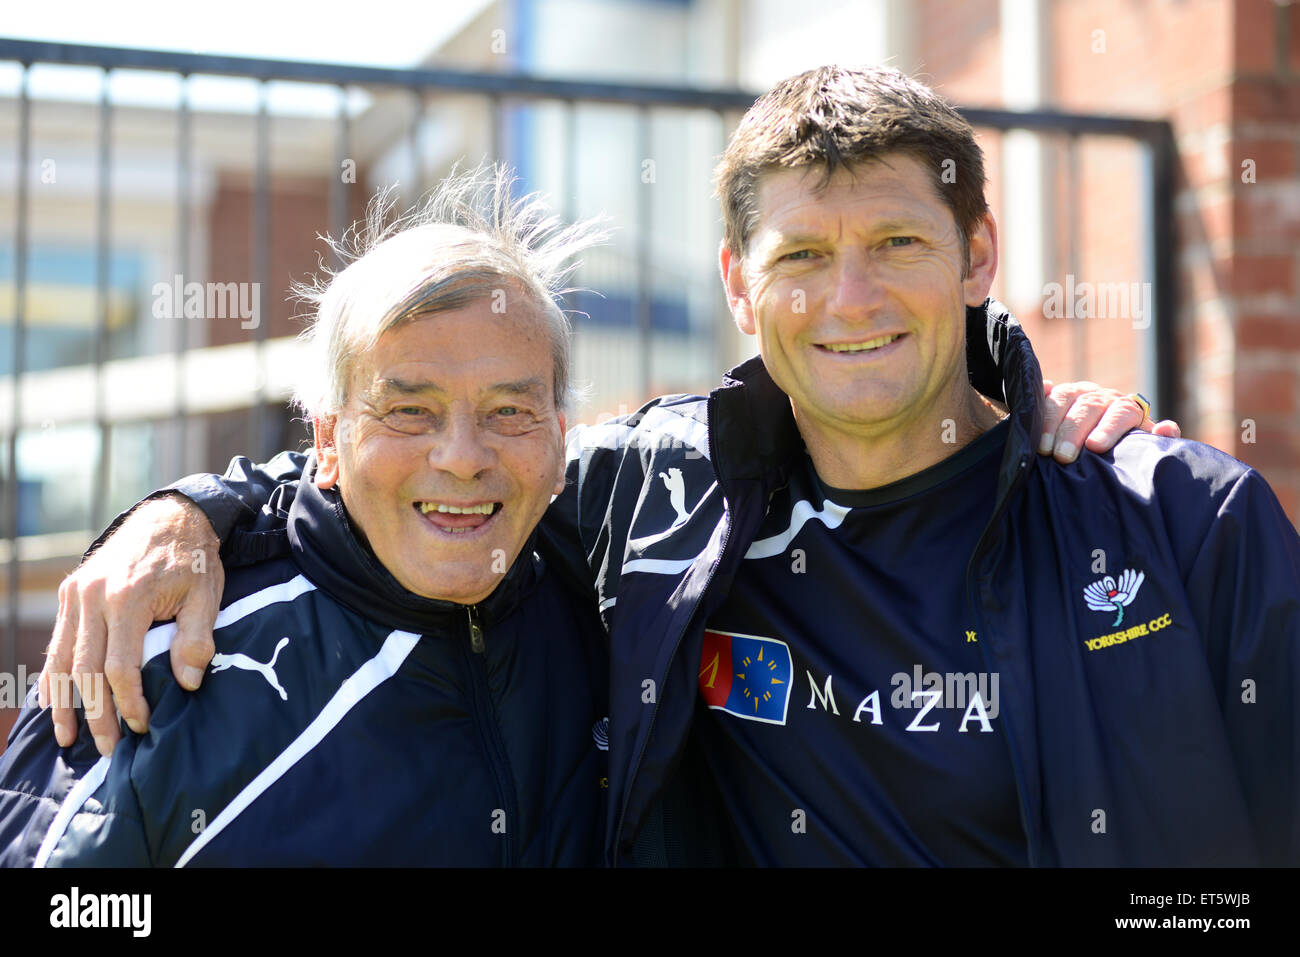 Yorkshire County Cricket Club's Dickie Bird and Martyn Moxon. Picture: Scott Bairstow/Alamy Stock Photo